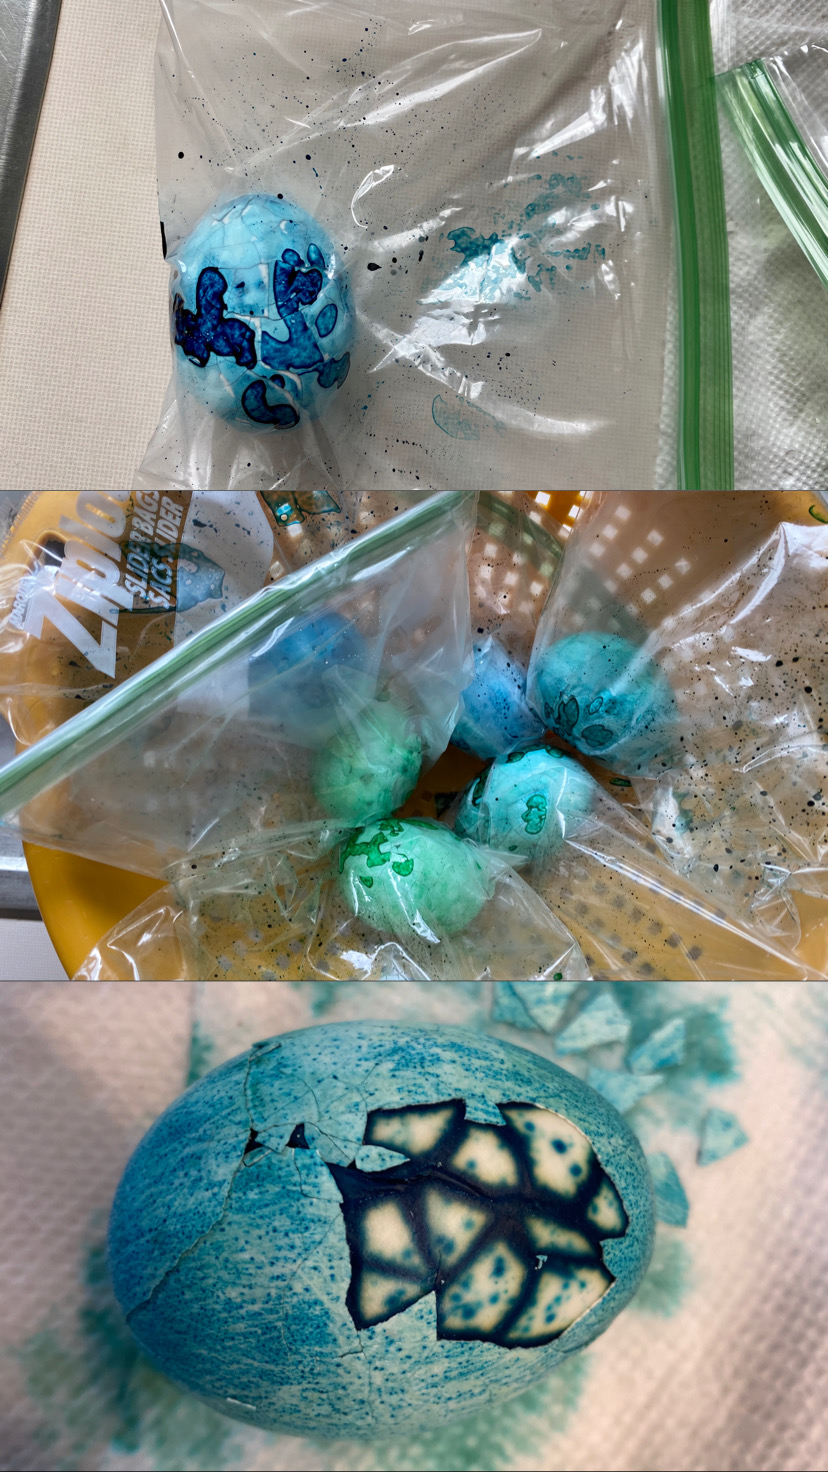 eggs in bags with food coloring dyed eggs partially peeled